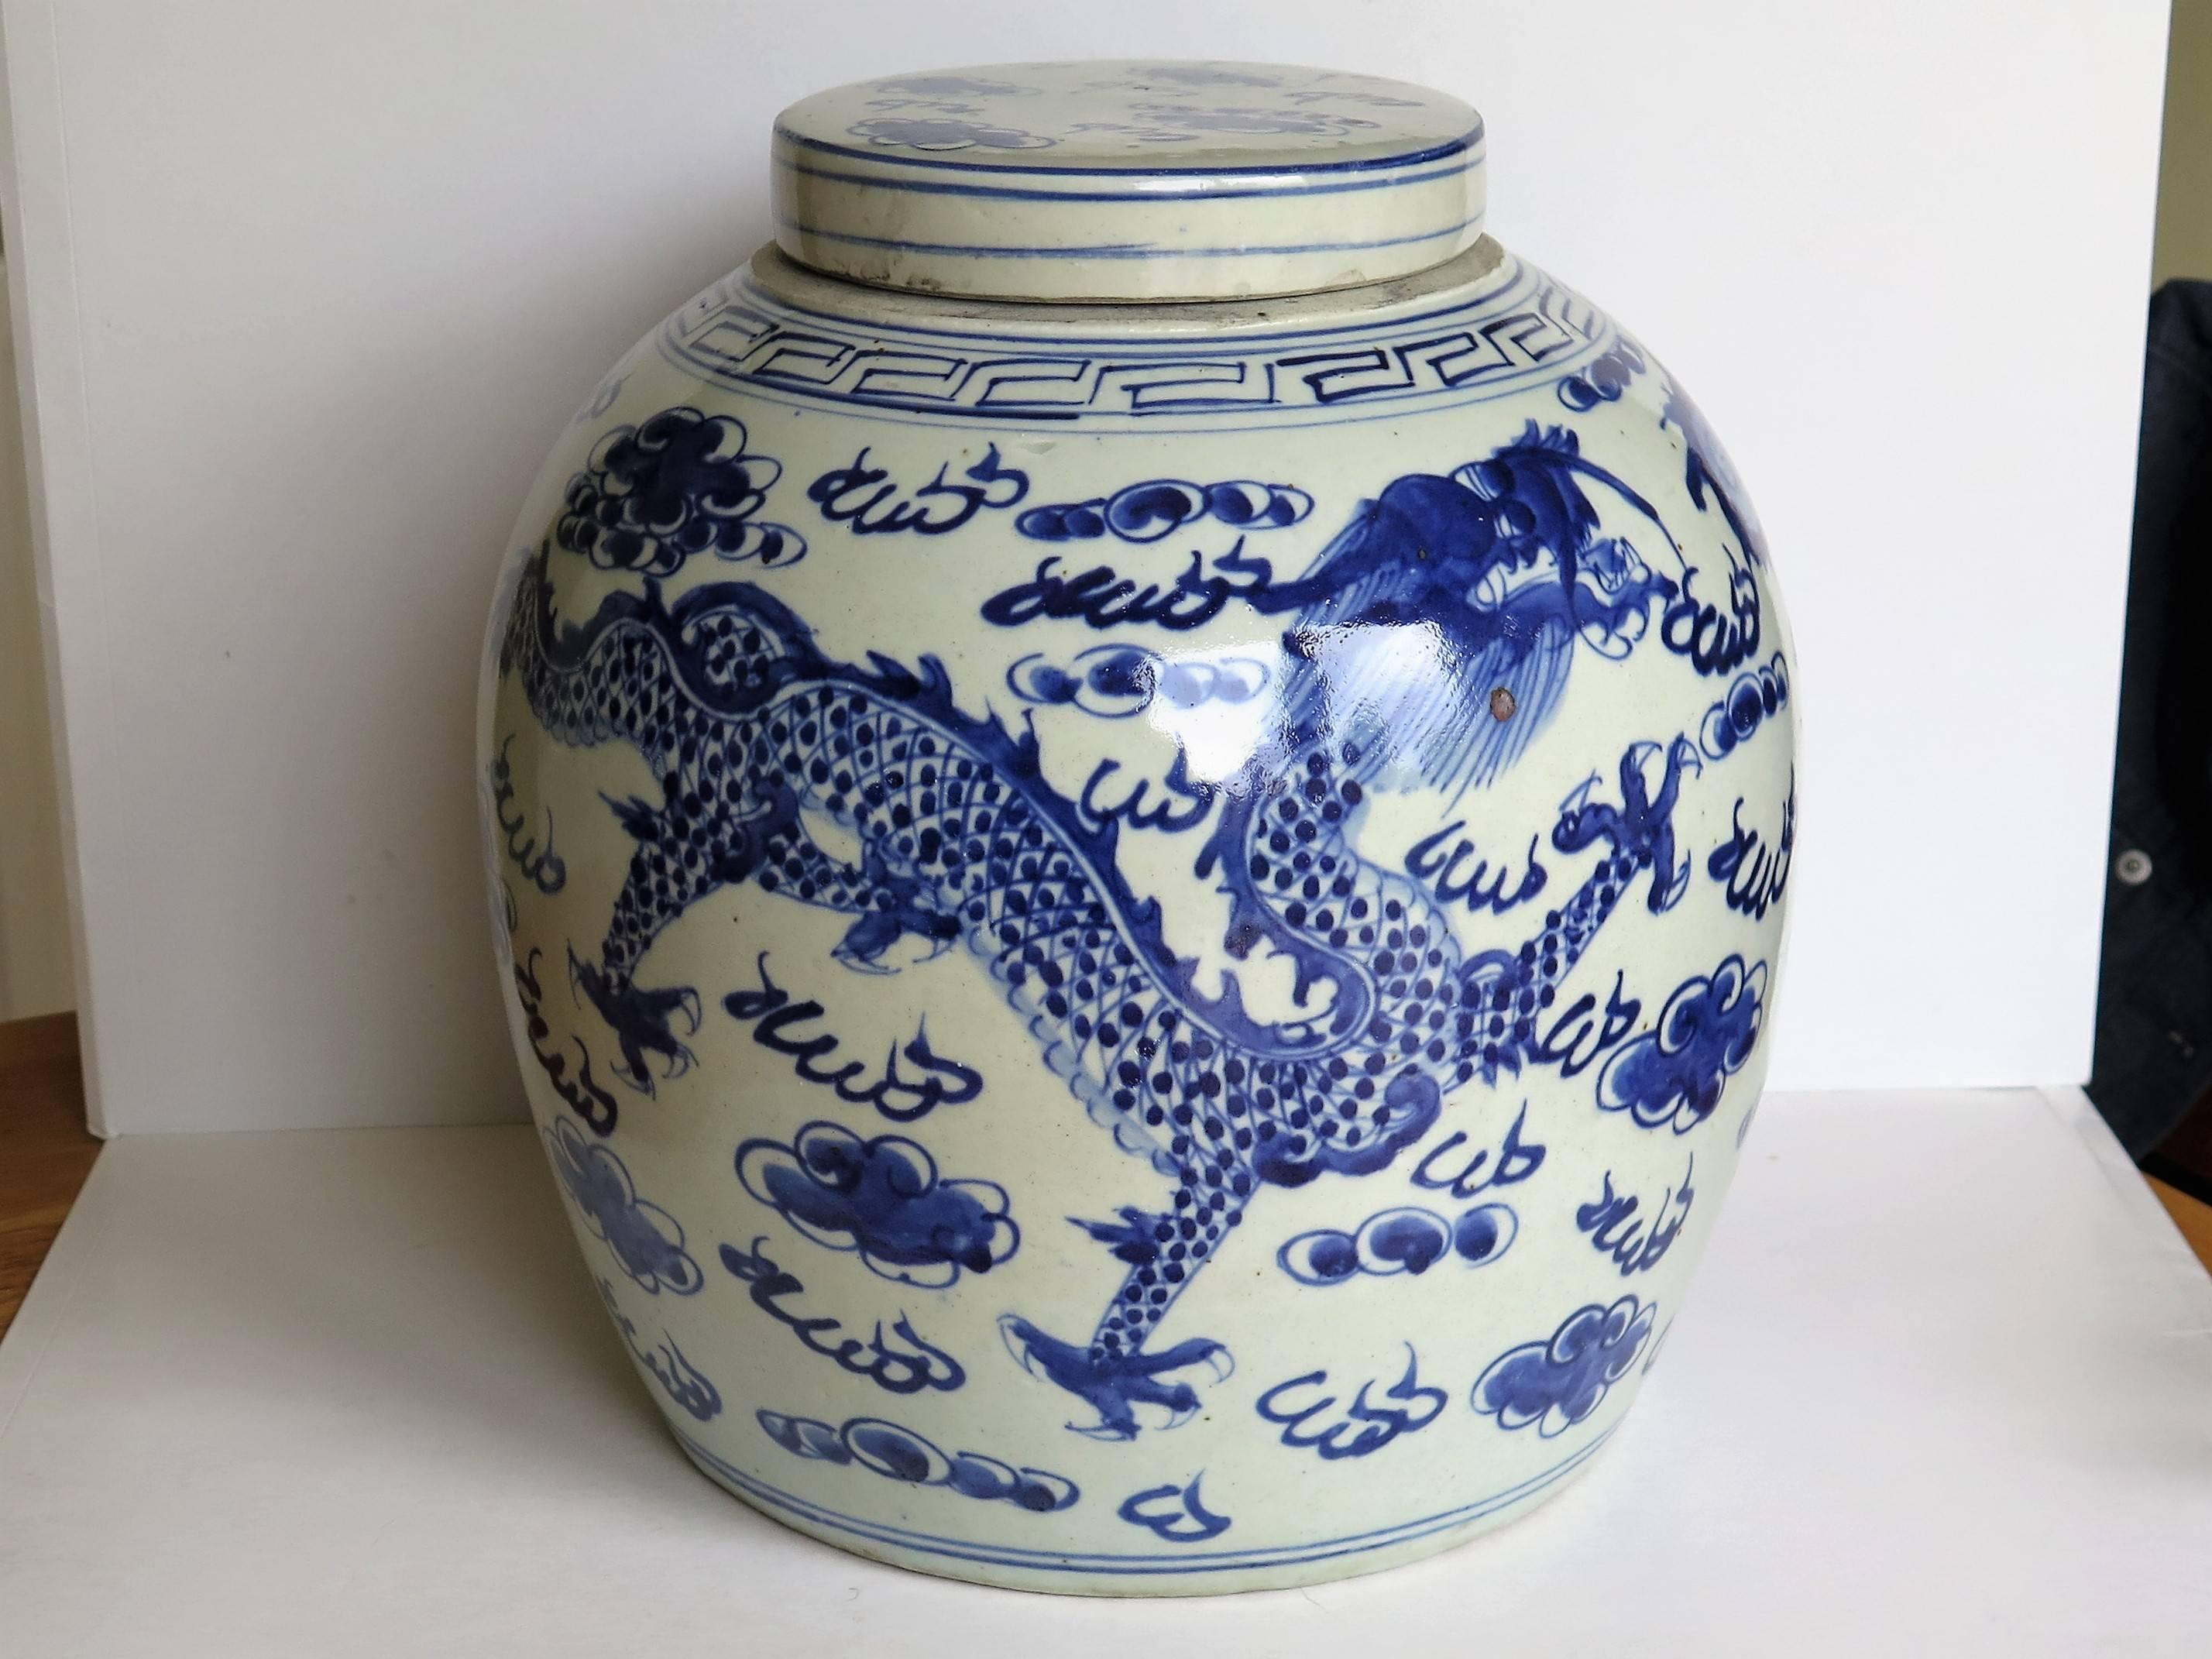 This is a very large Chinese porcelain lidded or covered jar.

The jar is hand potted and comes complete with its original lid.

The jar is beautifully hand decorated in a free flowing style with various shades of cobalt blue, showing two four-toed